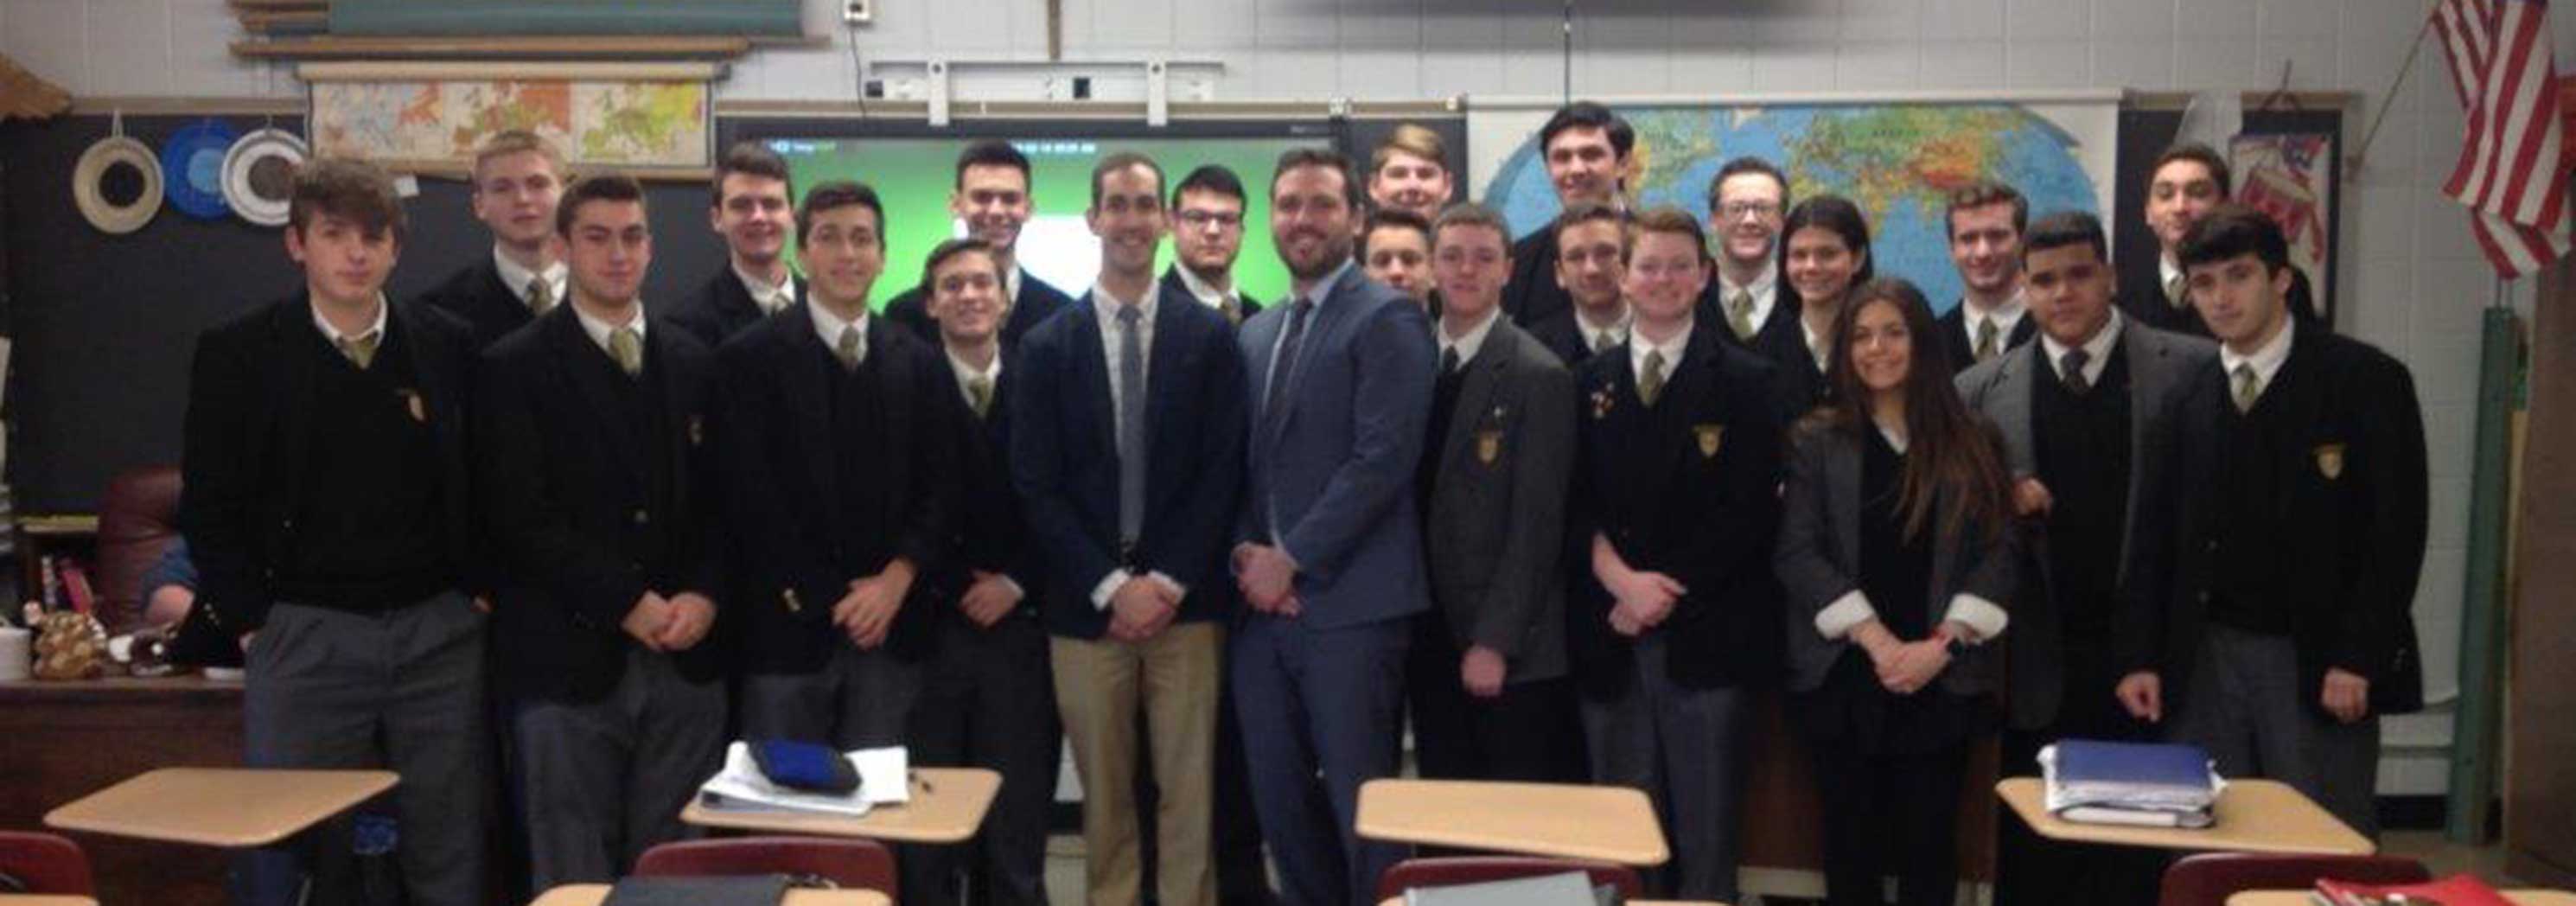 GMAG teaches students at St. Anthony’s High School the principles of investing